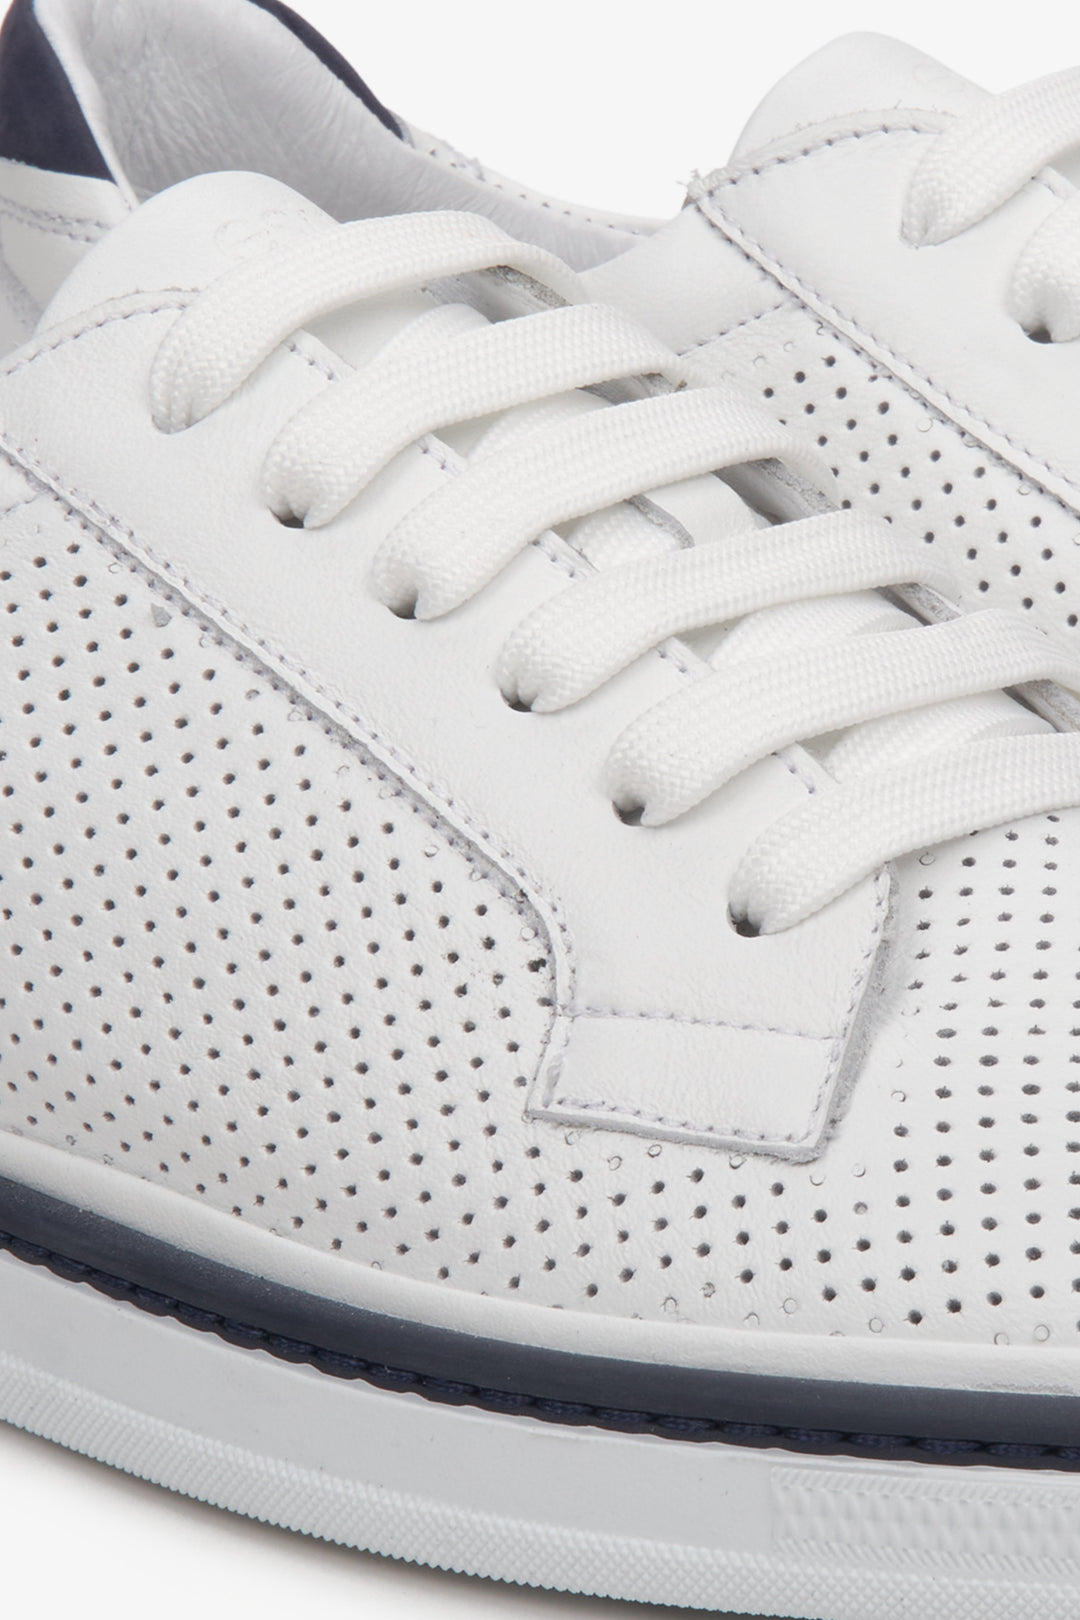 Estro men's sneakers in white with perforations and lacing for summer - close-up on details.